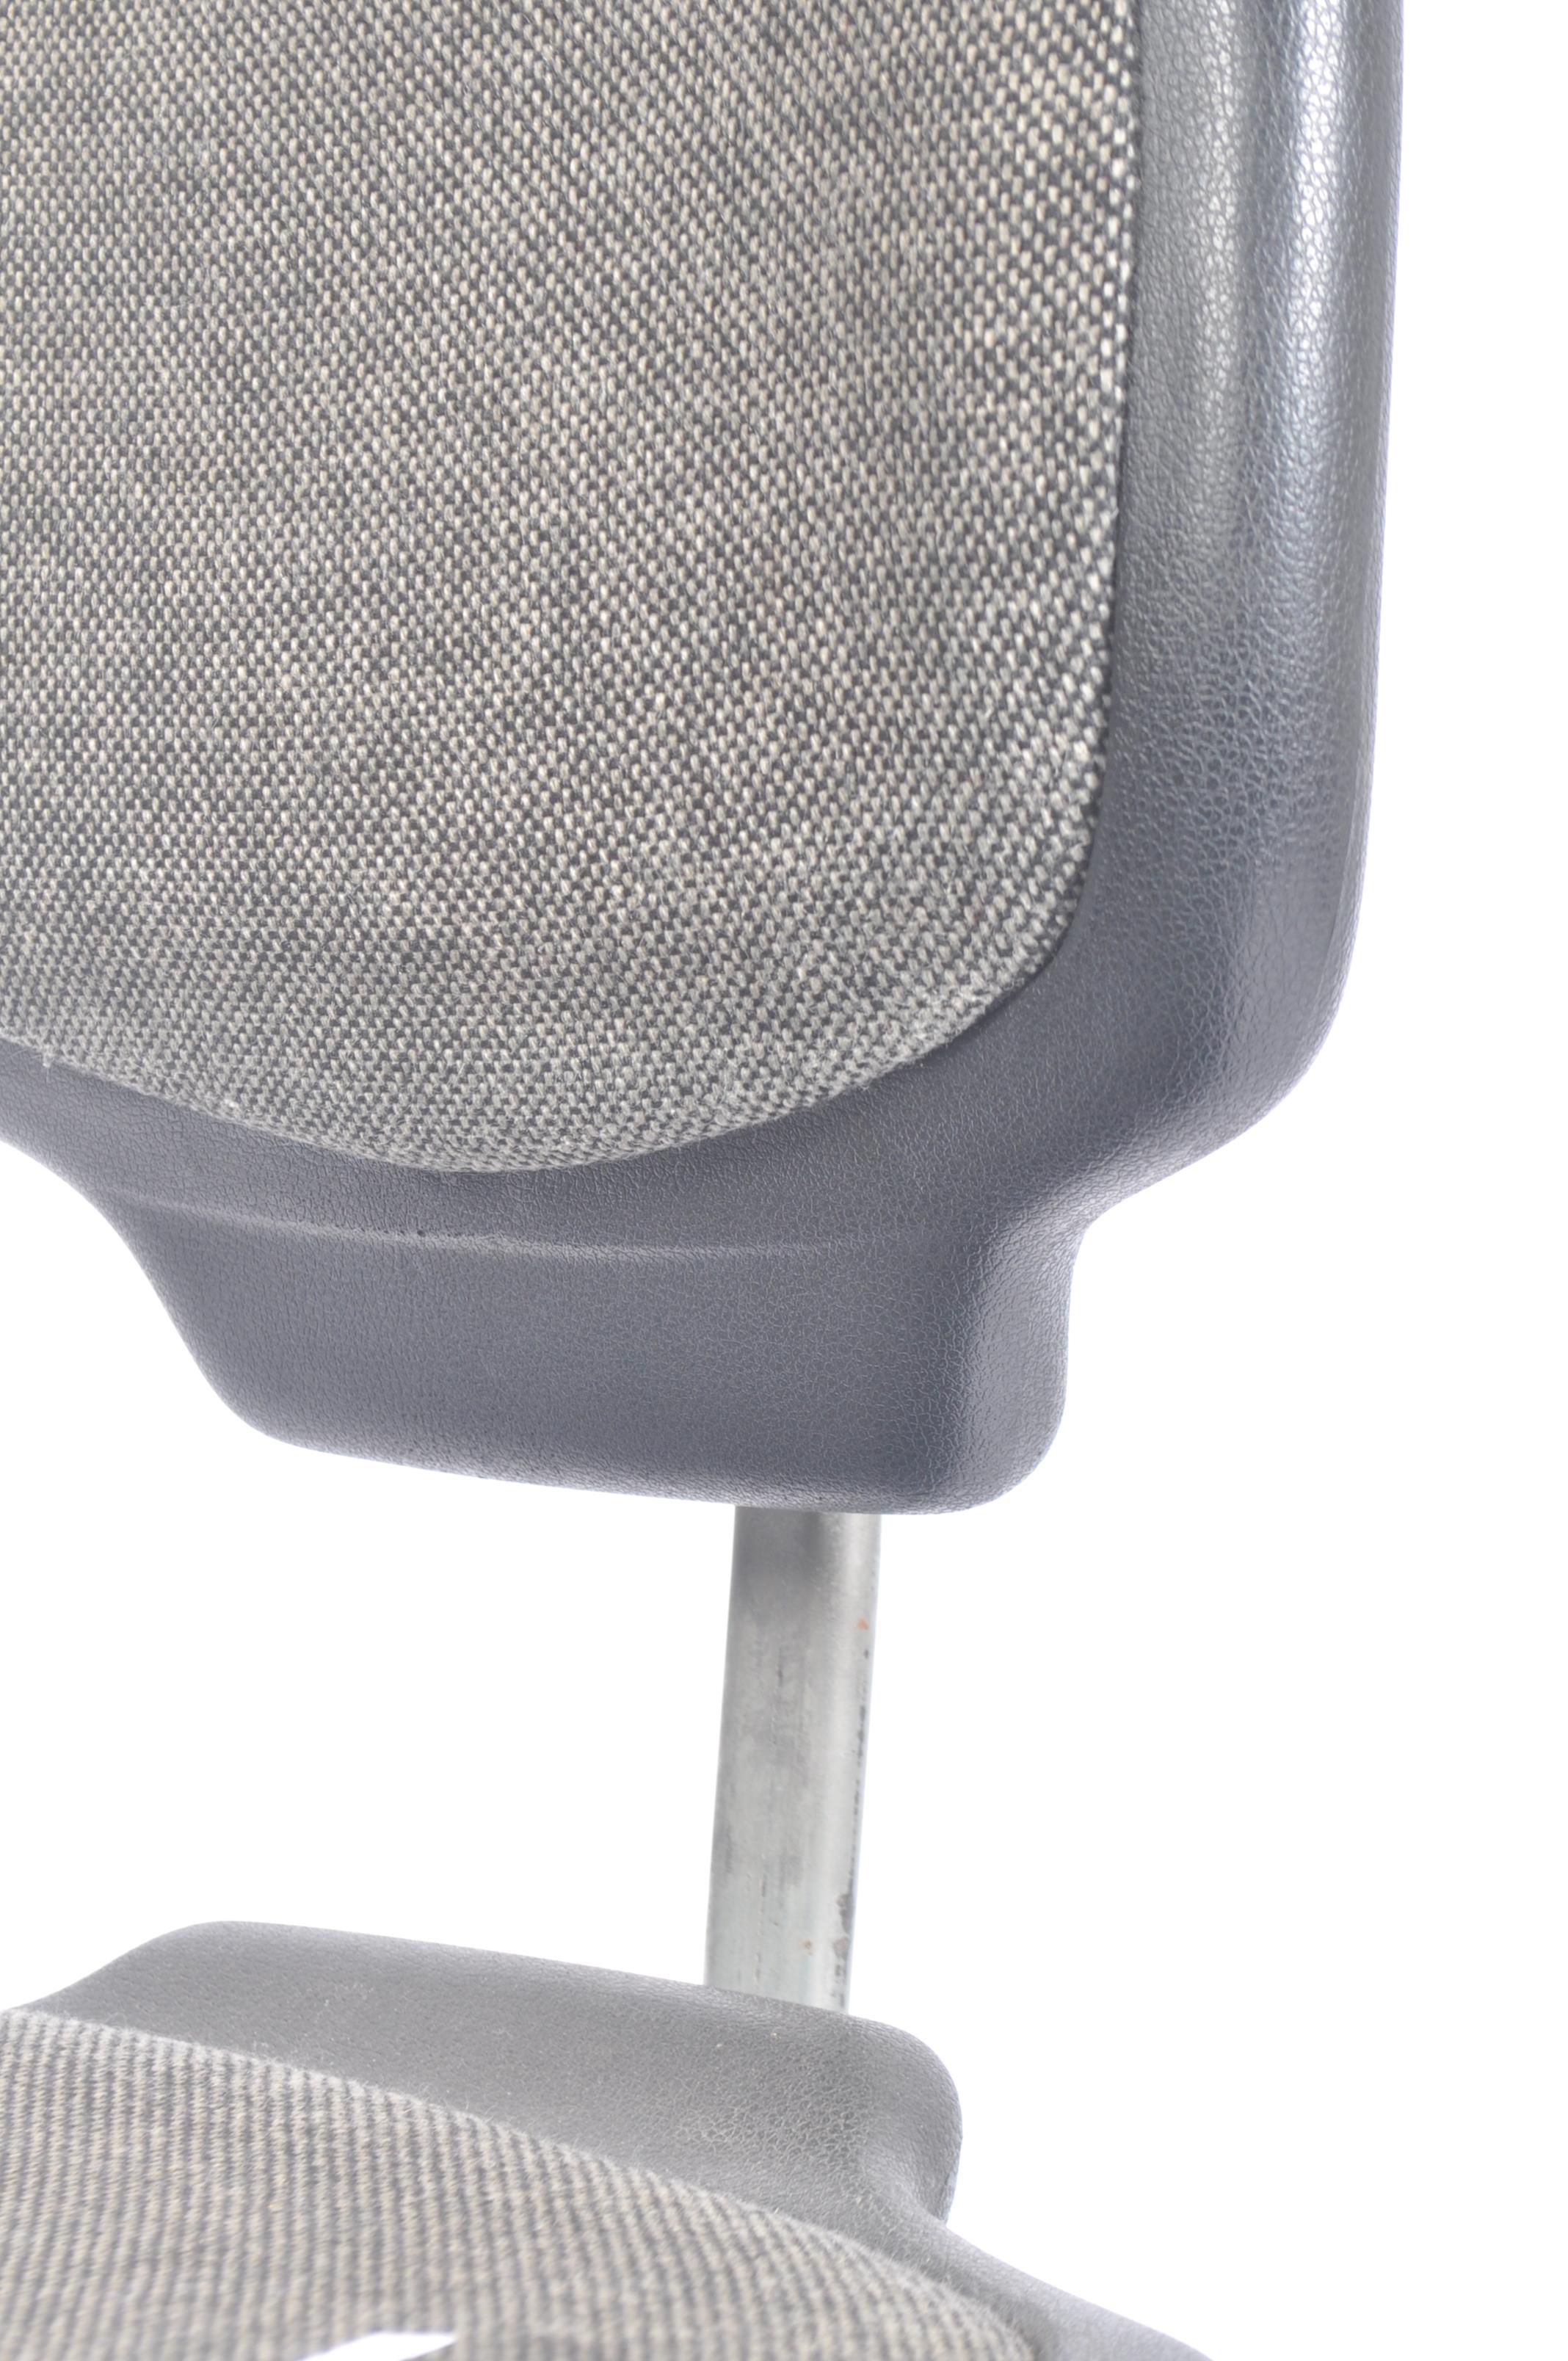 LATE 20TH CENTURY 1990s INDUSTRIAL OFFICE DESK CHAIR - Image 2 of 4